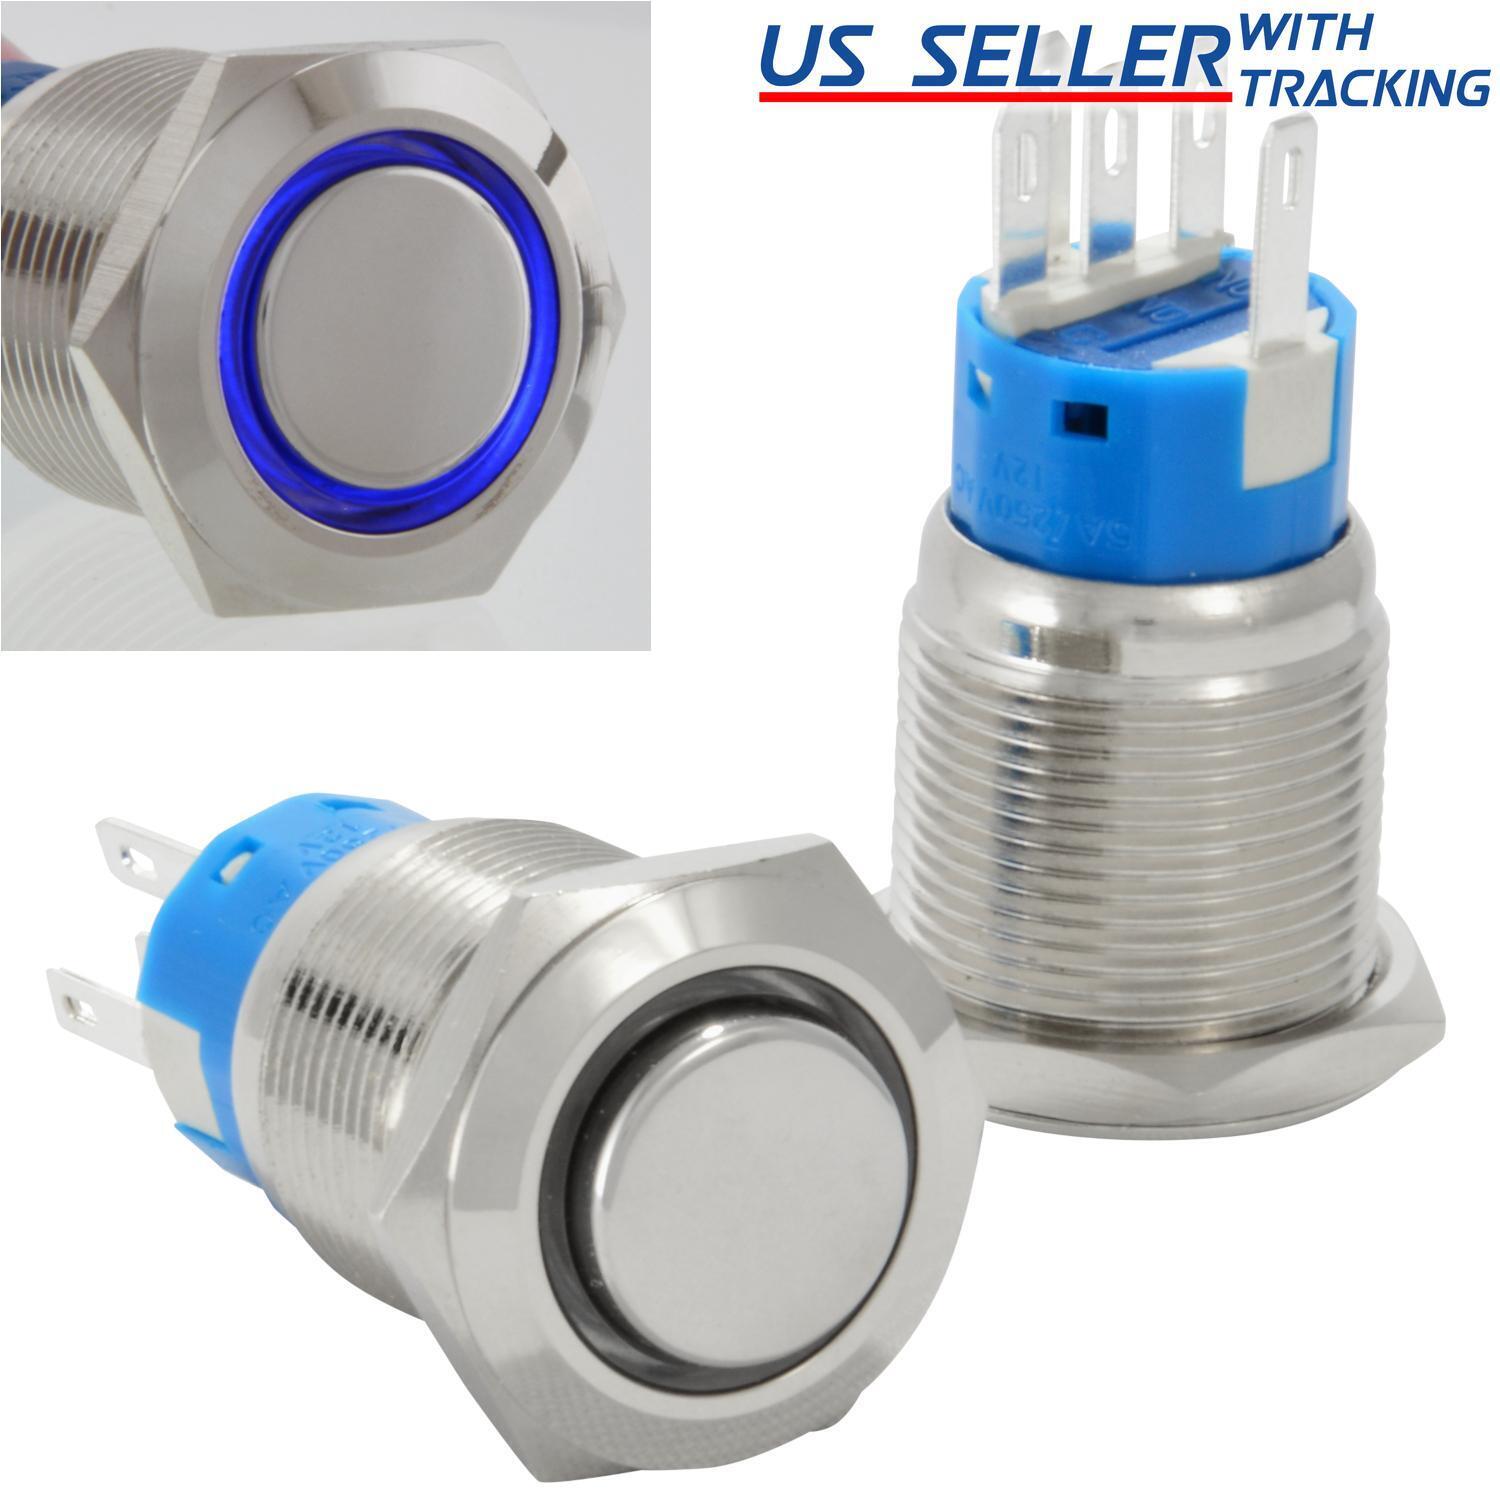 19mm Stainless Steel Momentary Push Button Switch with Blue LED